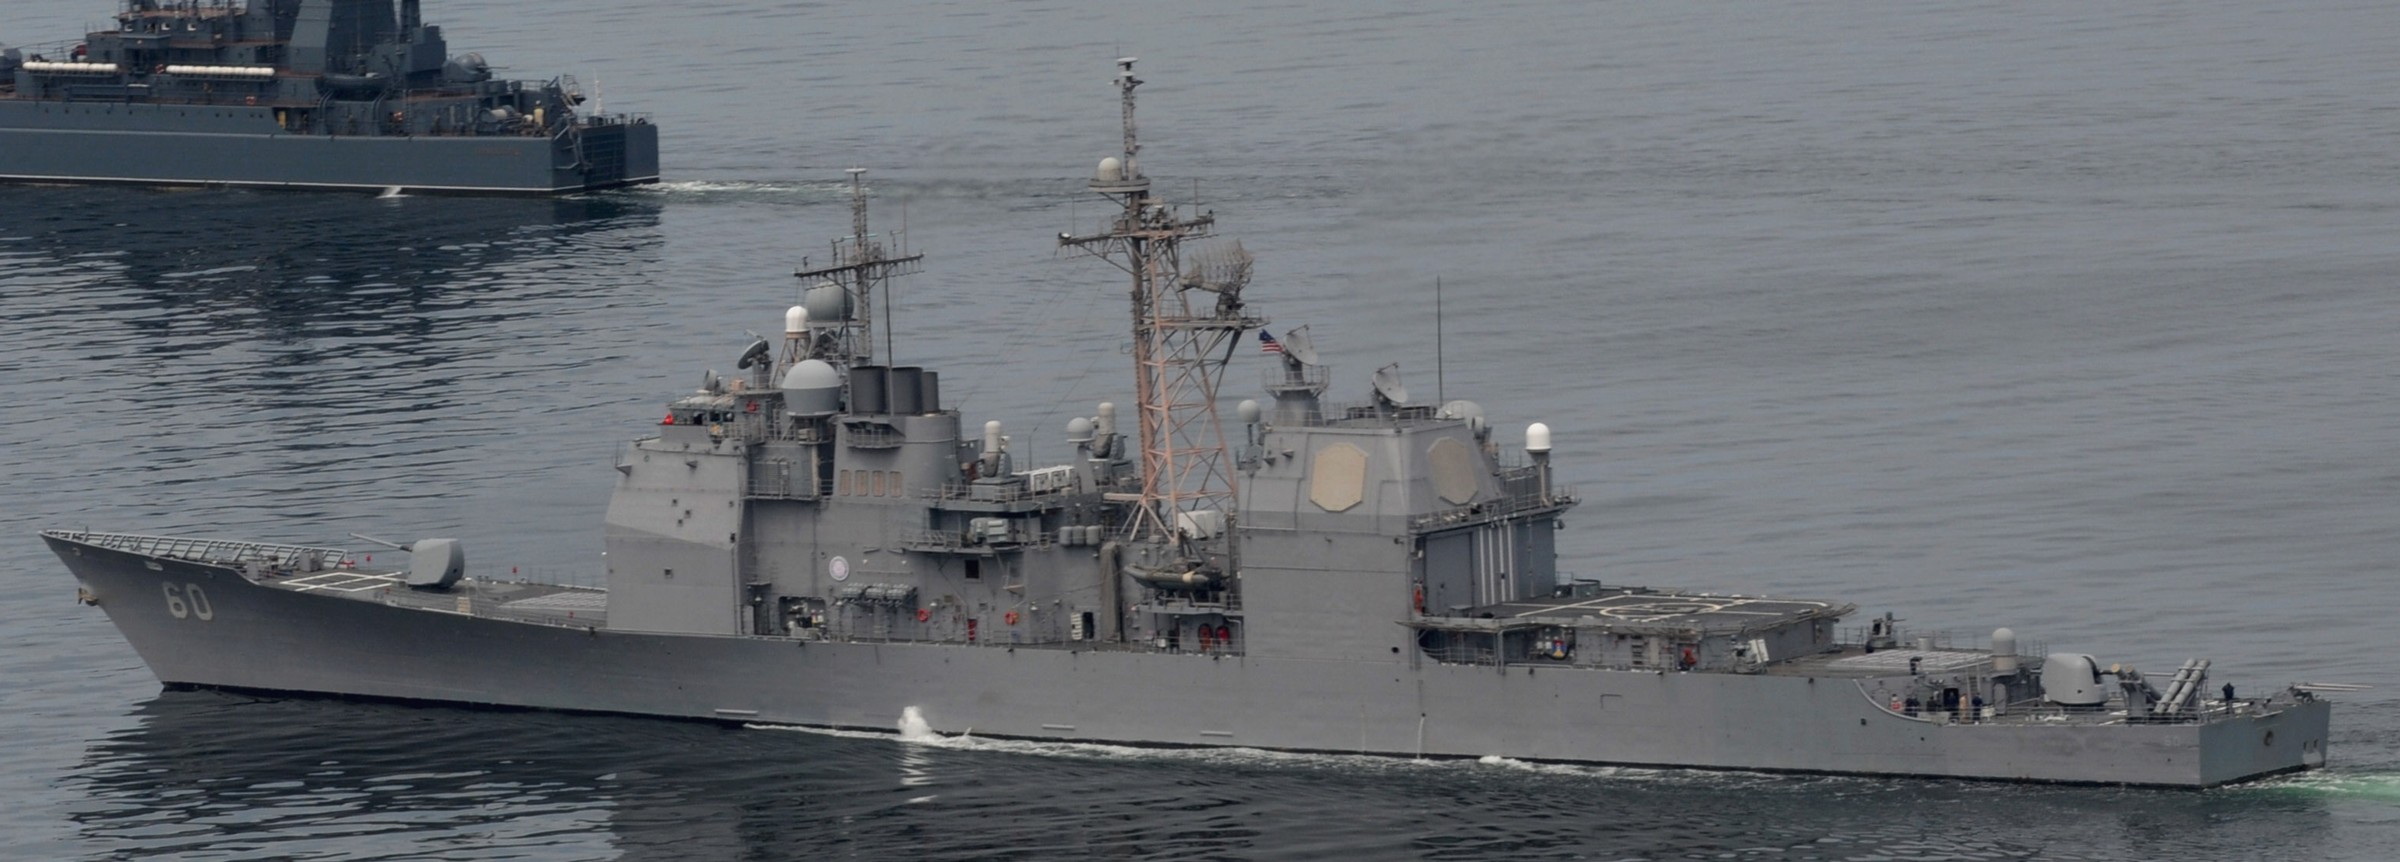 cg-60 uss normandy ticonderoga class guided missile cruiser aegis us navy exercise baltops 38